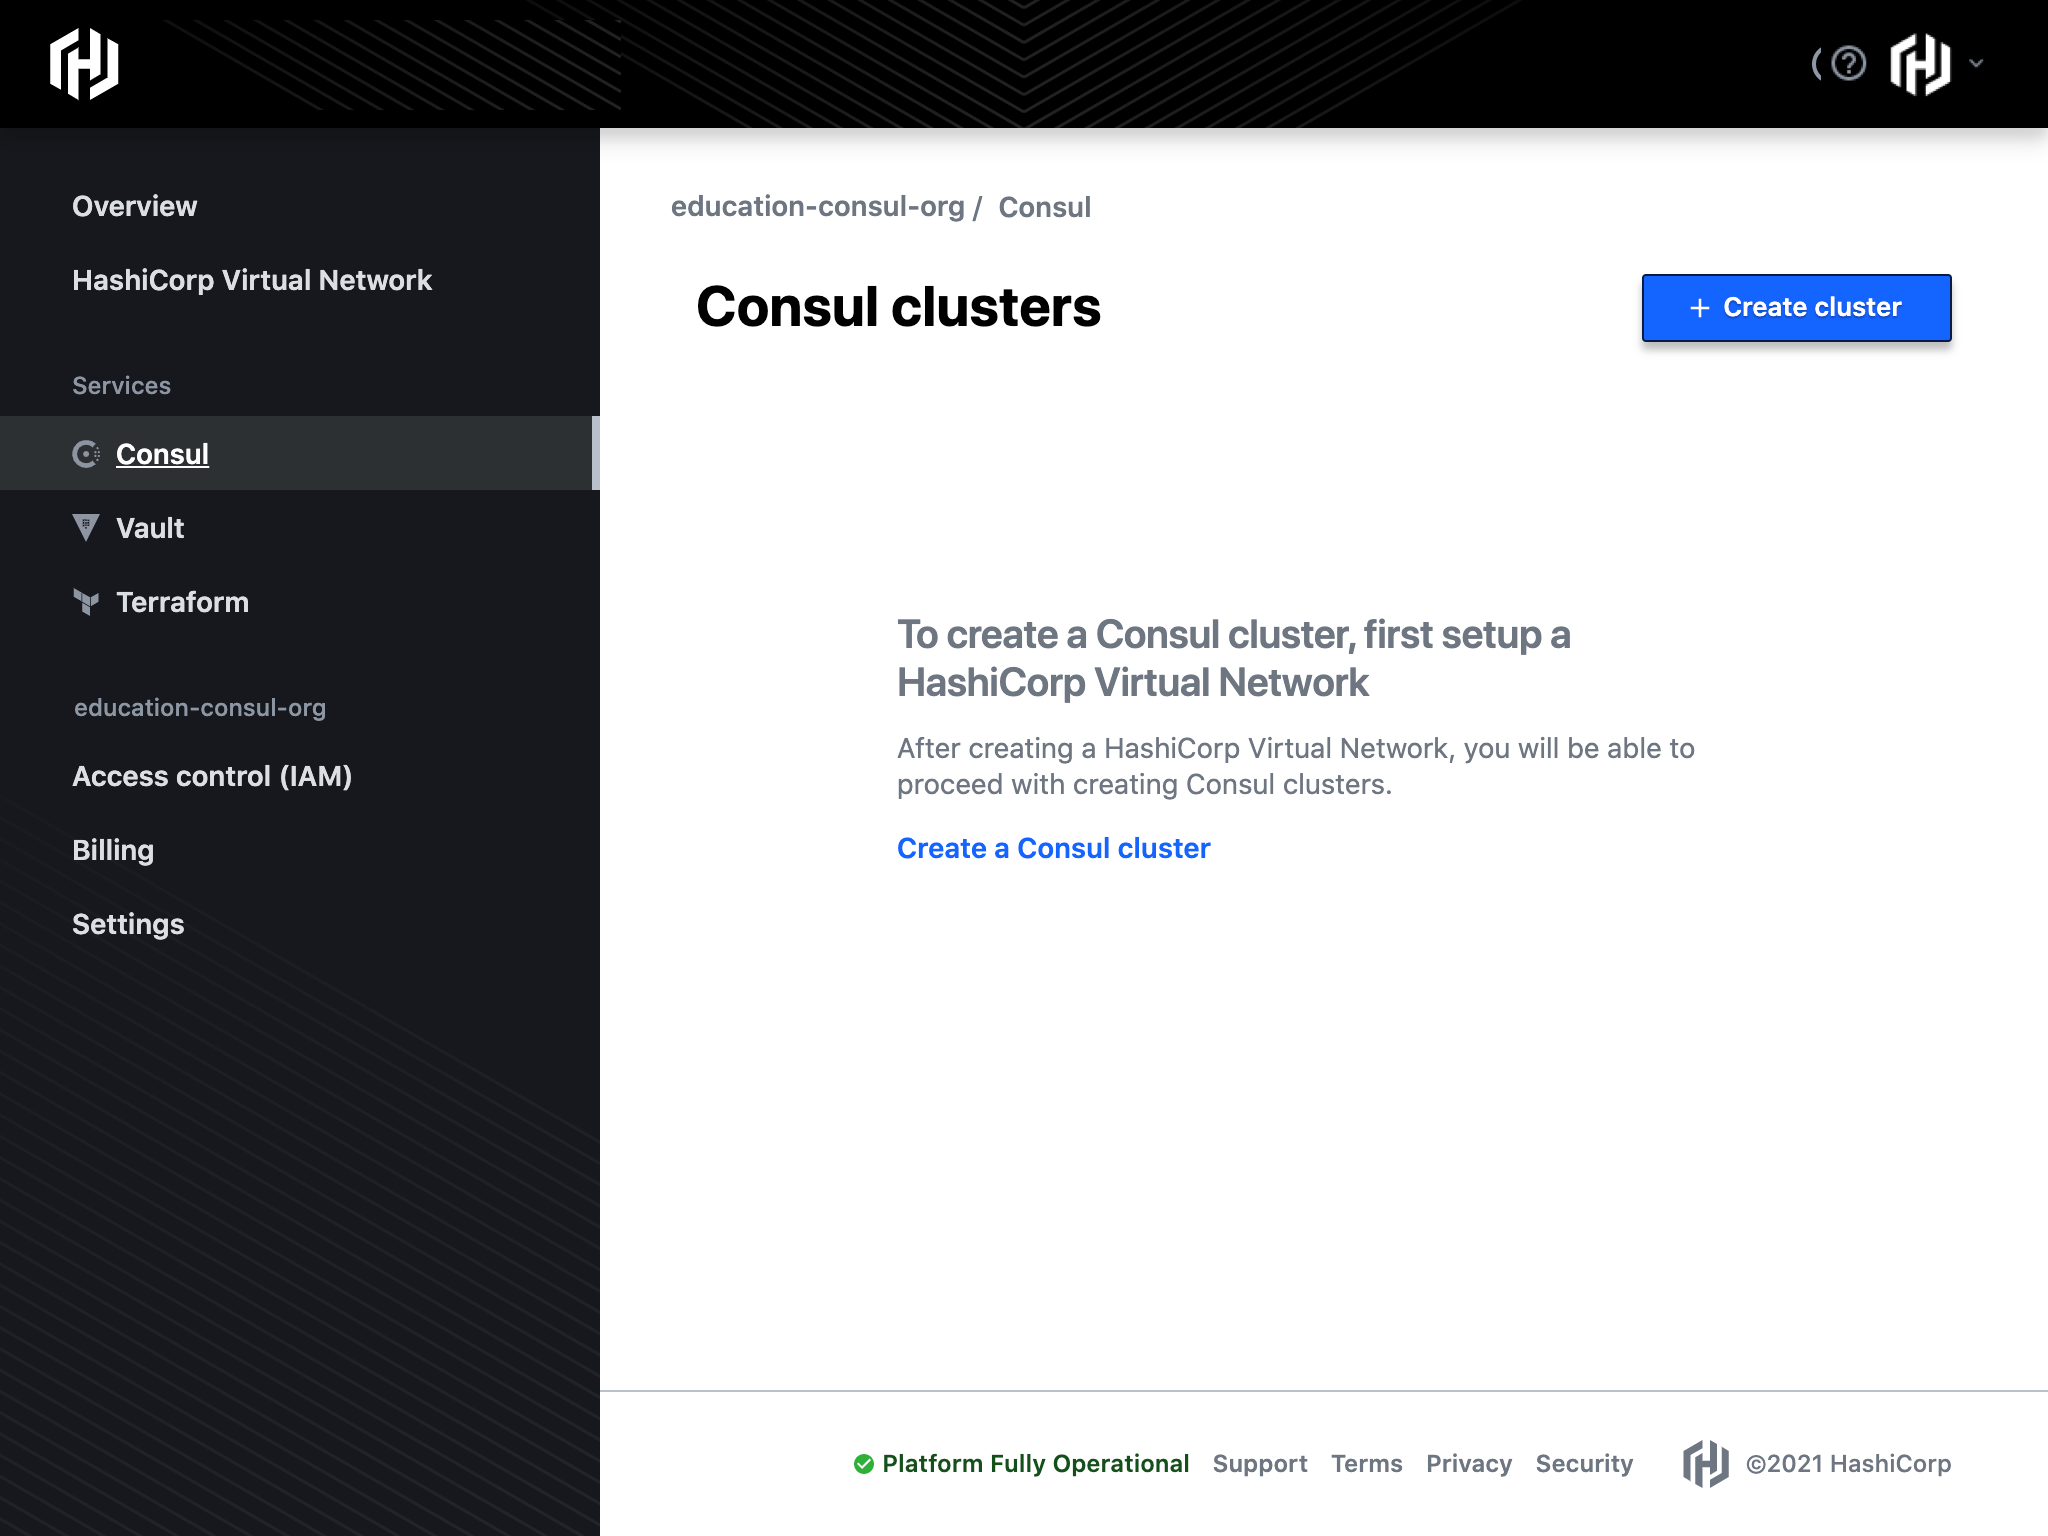 Arrow pointing to the Consul cluster create button